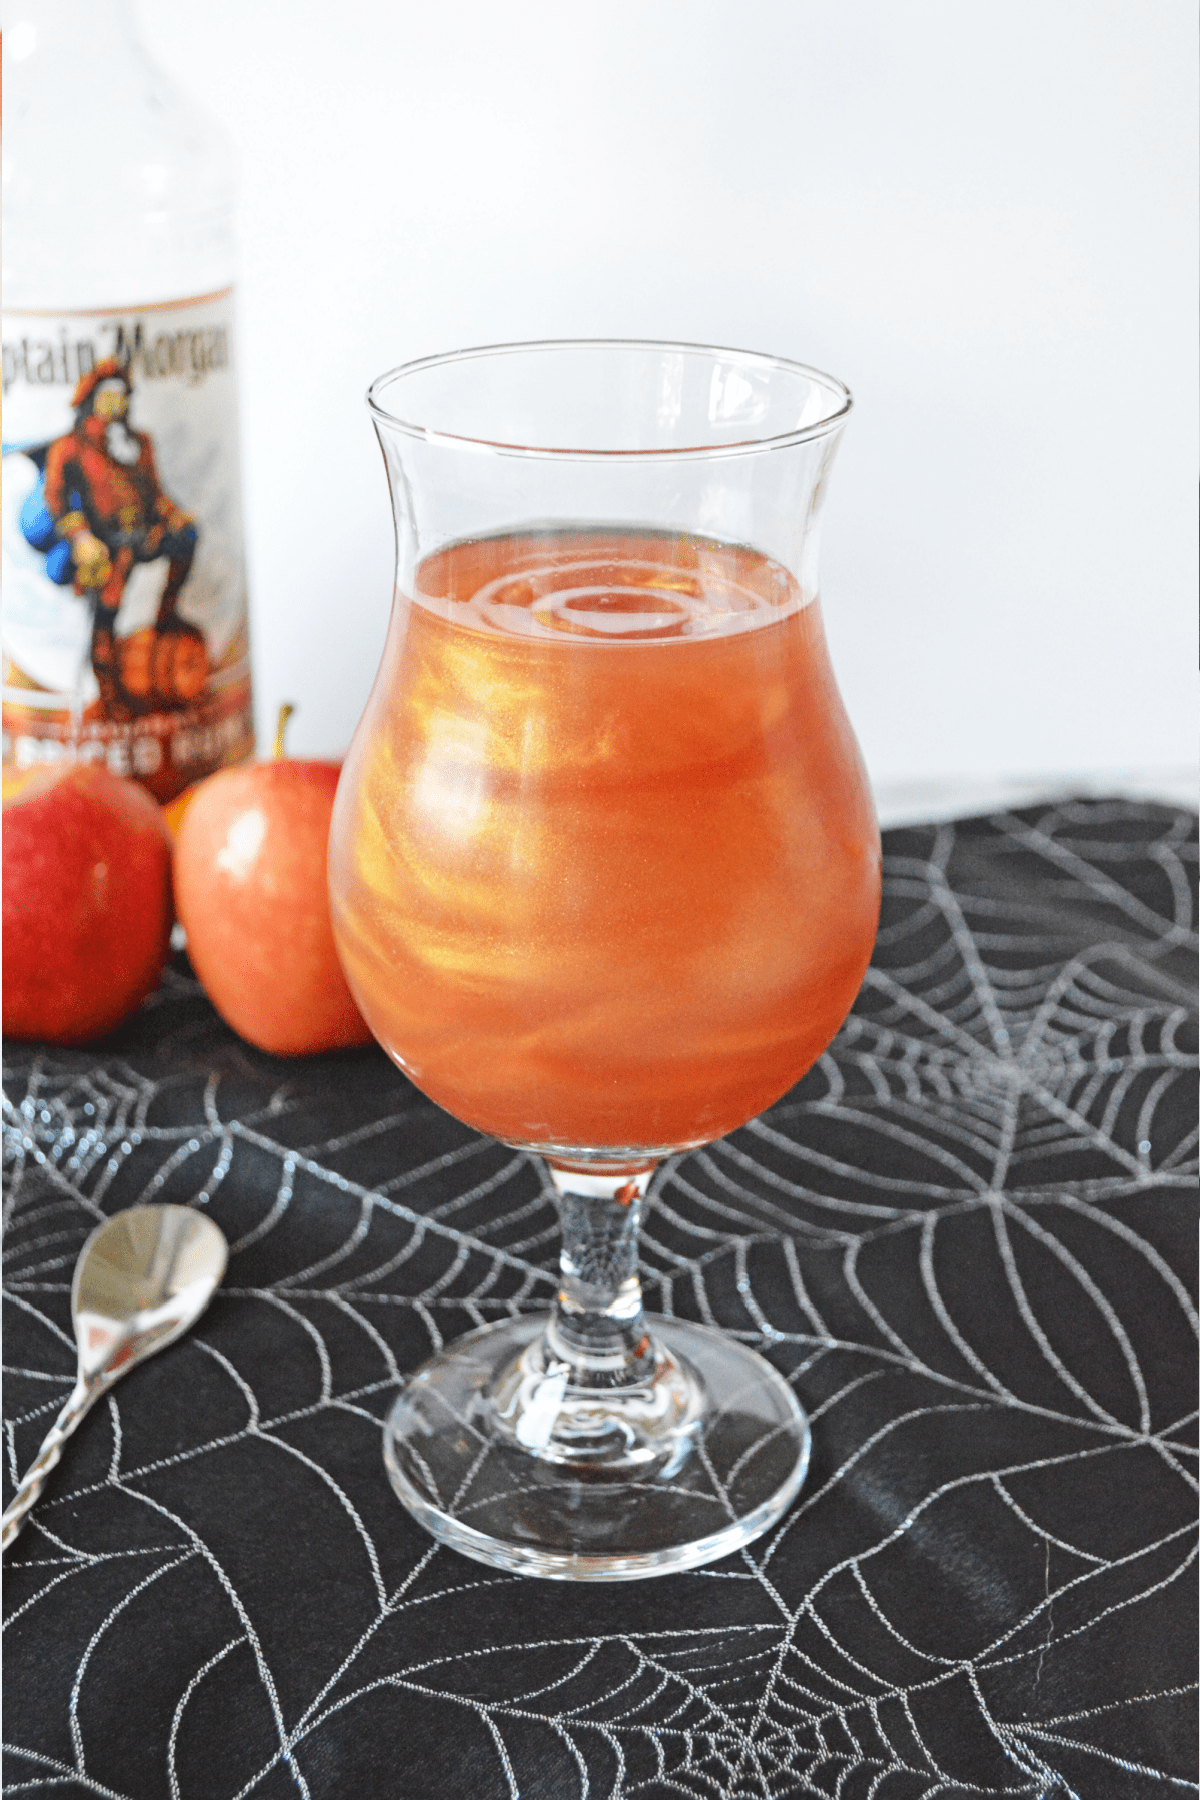 Poison apple cocktail with bottle of Captain Morgan spiced rum